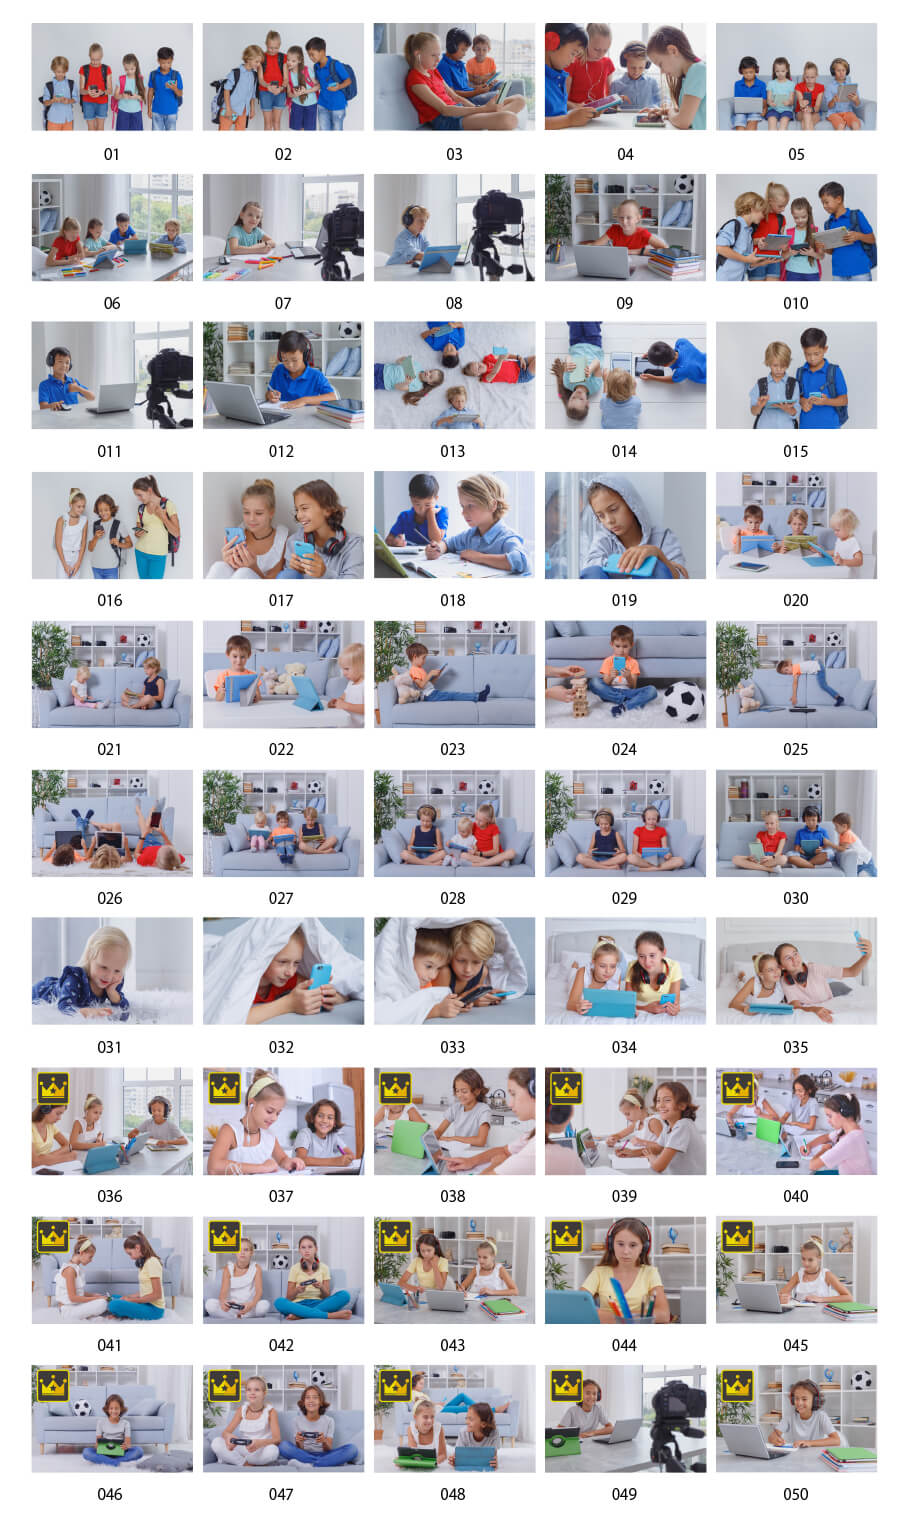 Pictures of children using gadgets